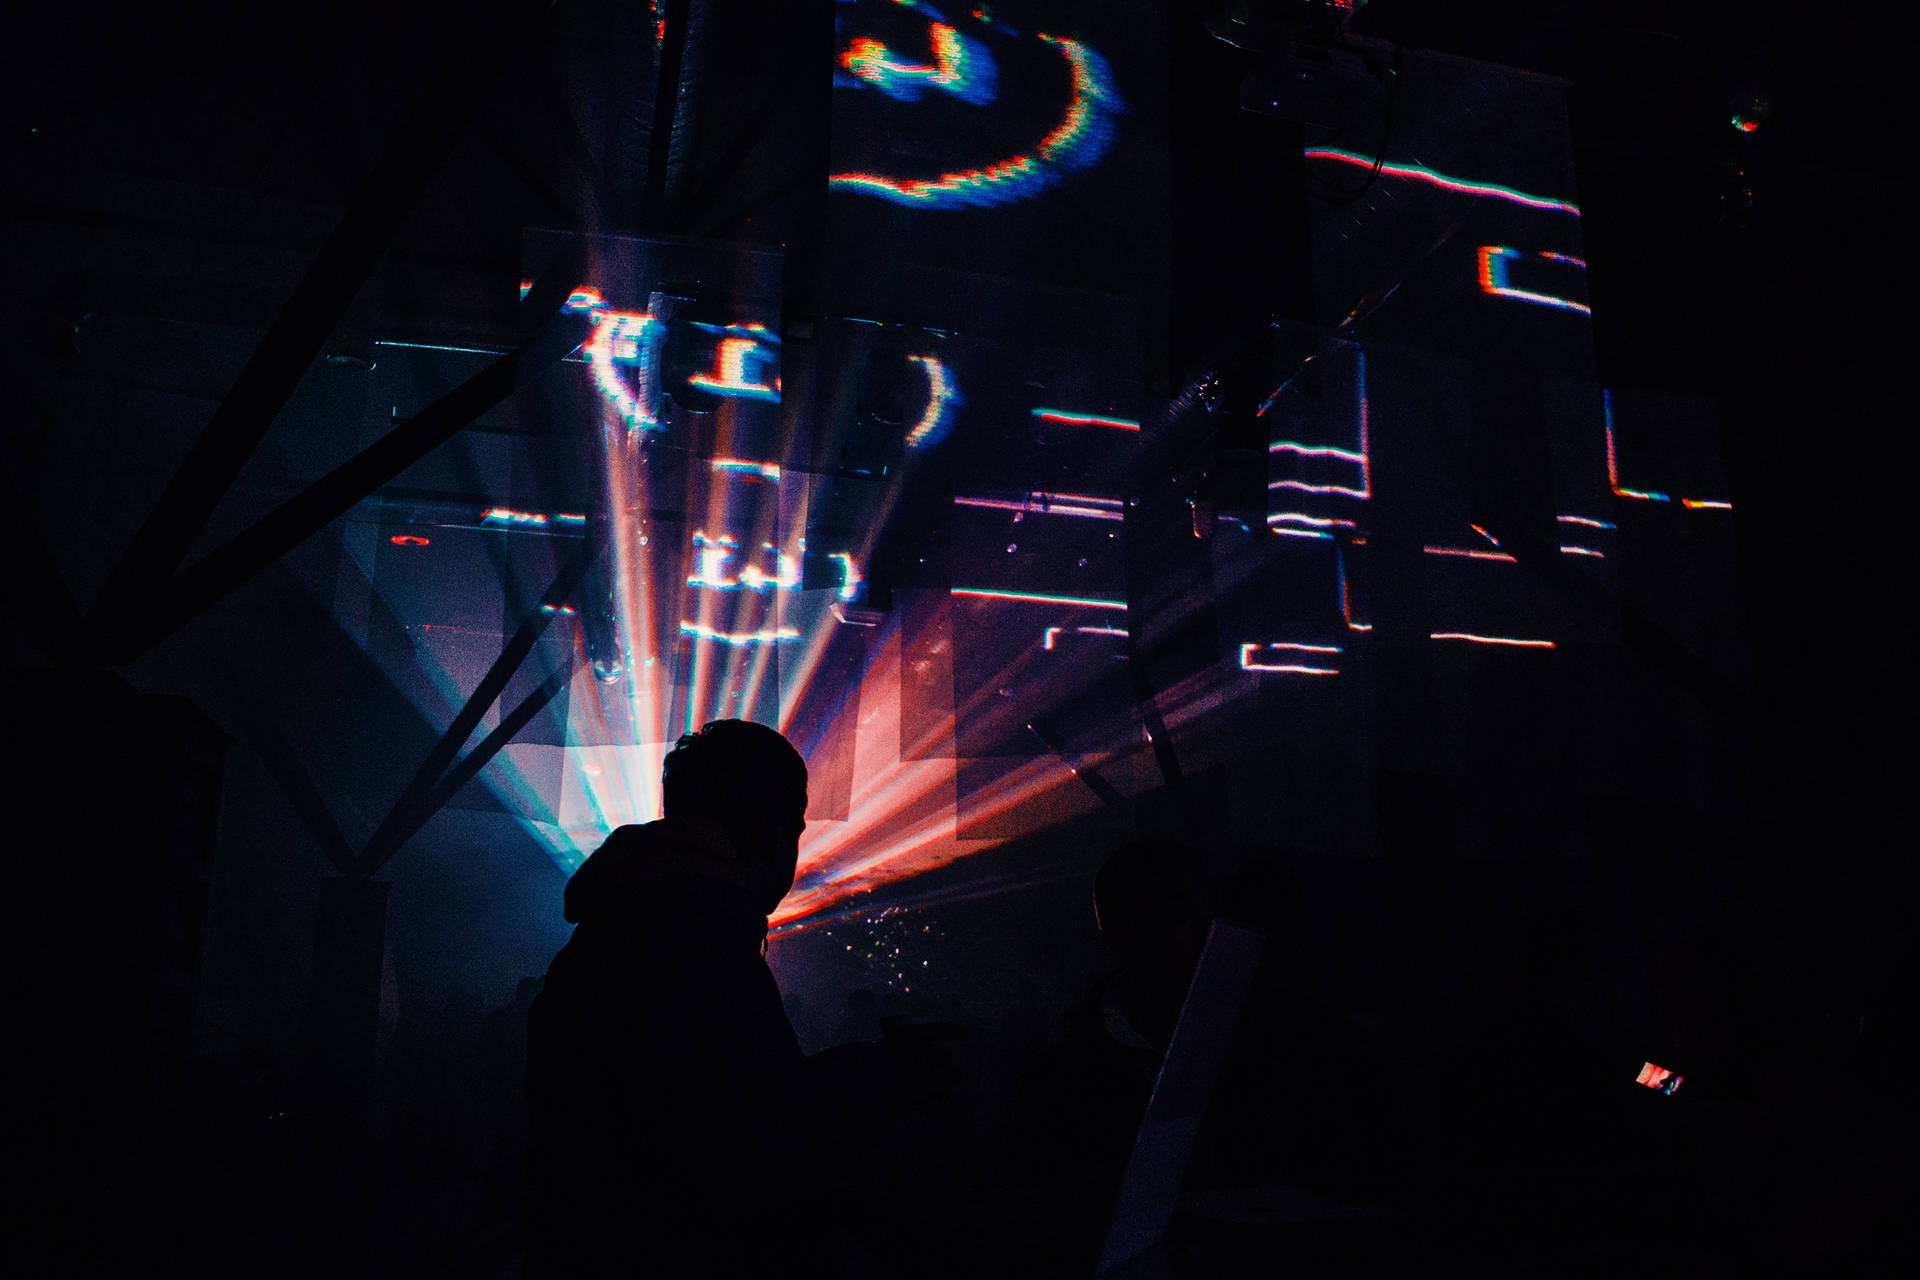 Aesthetic Music With Club Lights And Man Wallpaper